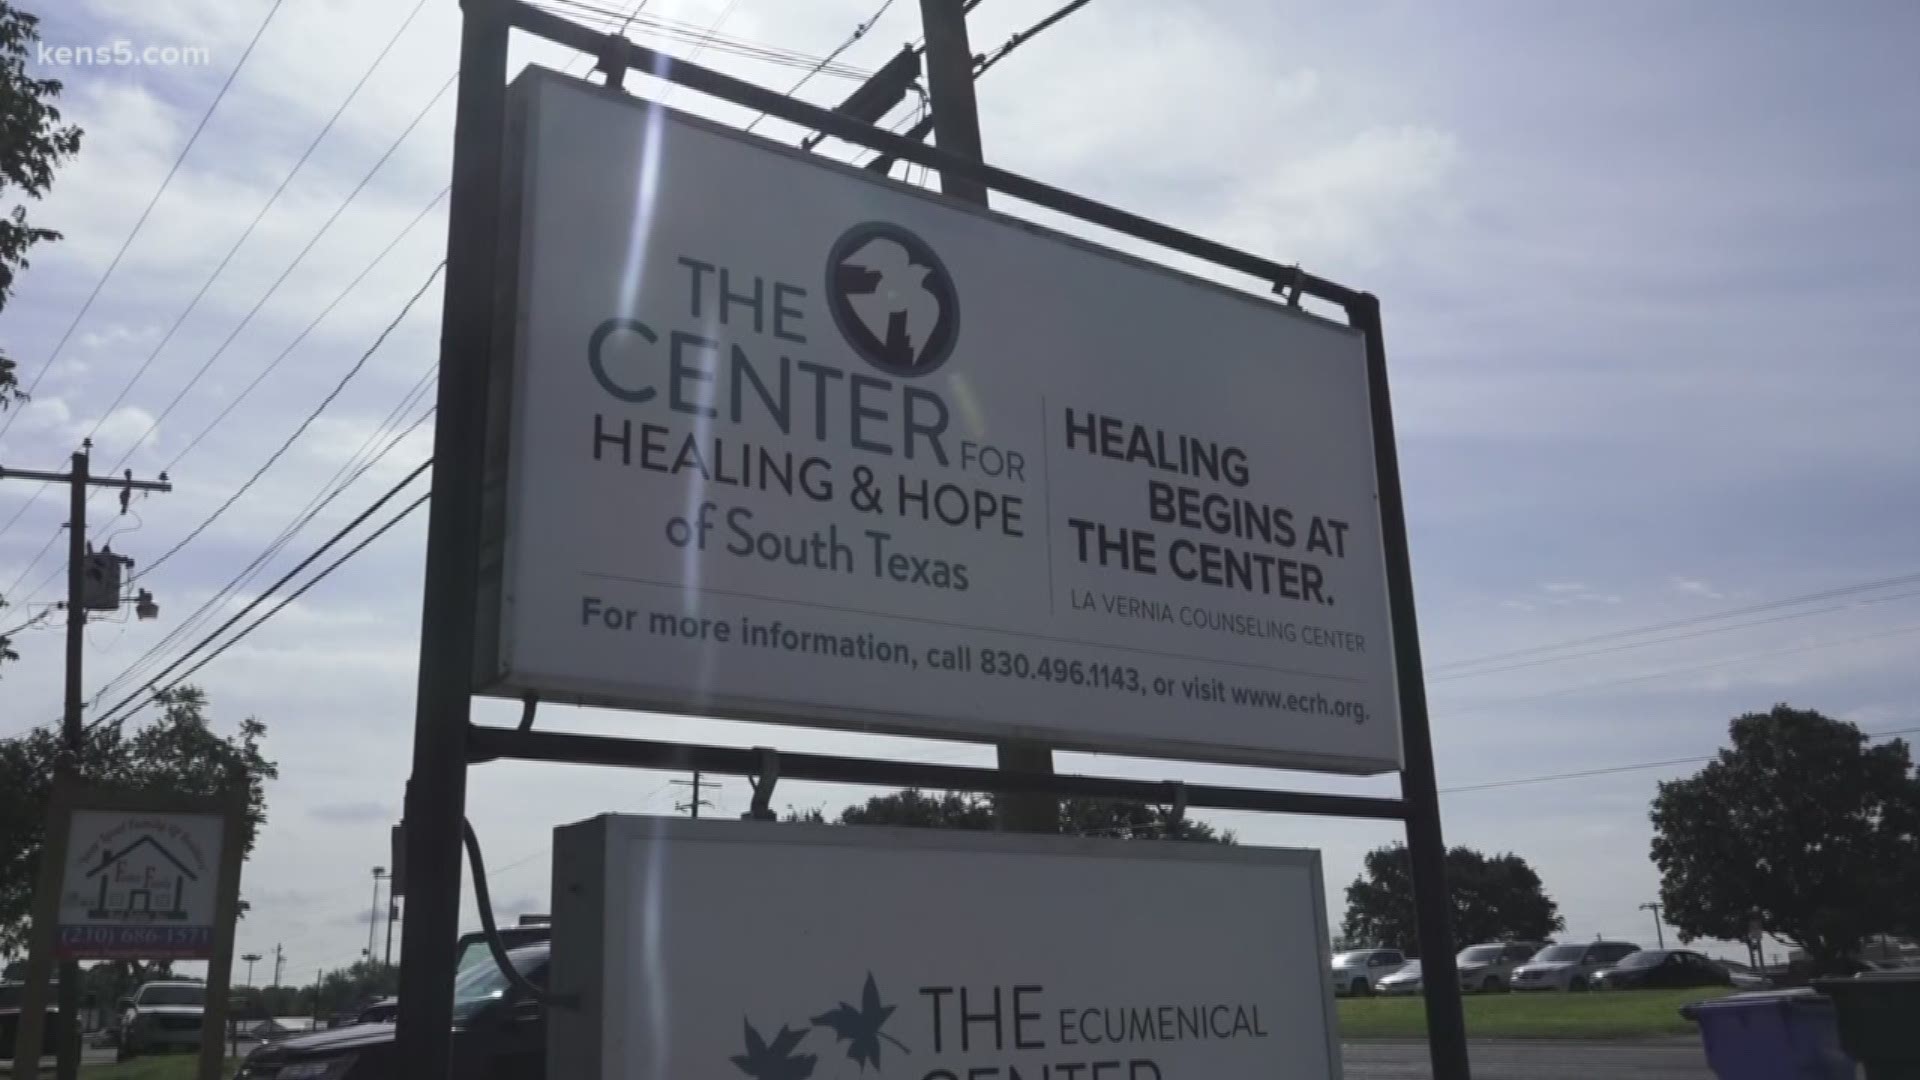 The Center for Healing and Hope of South Texas opened in La Vernia on Friday, providing free counseling for those in the community still dealing with the aftermath of the Sutherland Springs shooting.